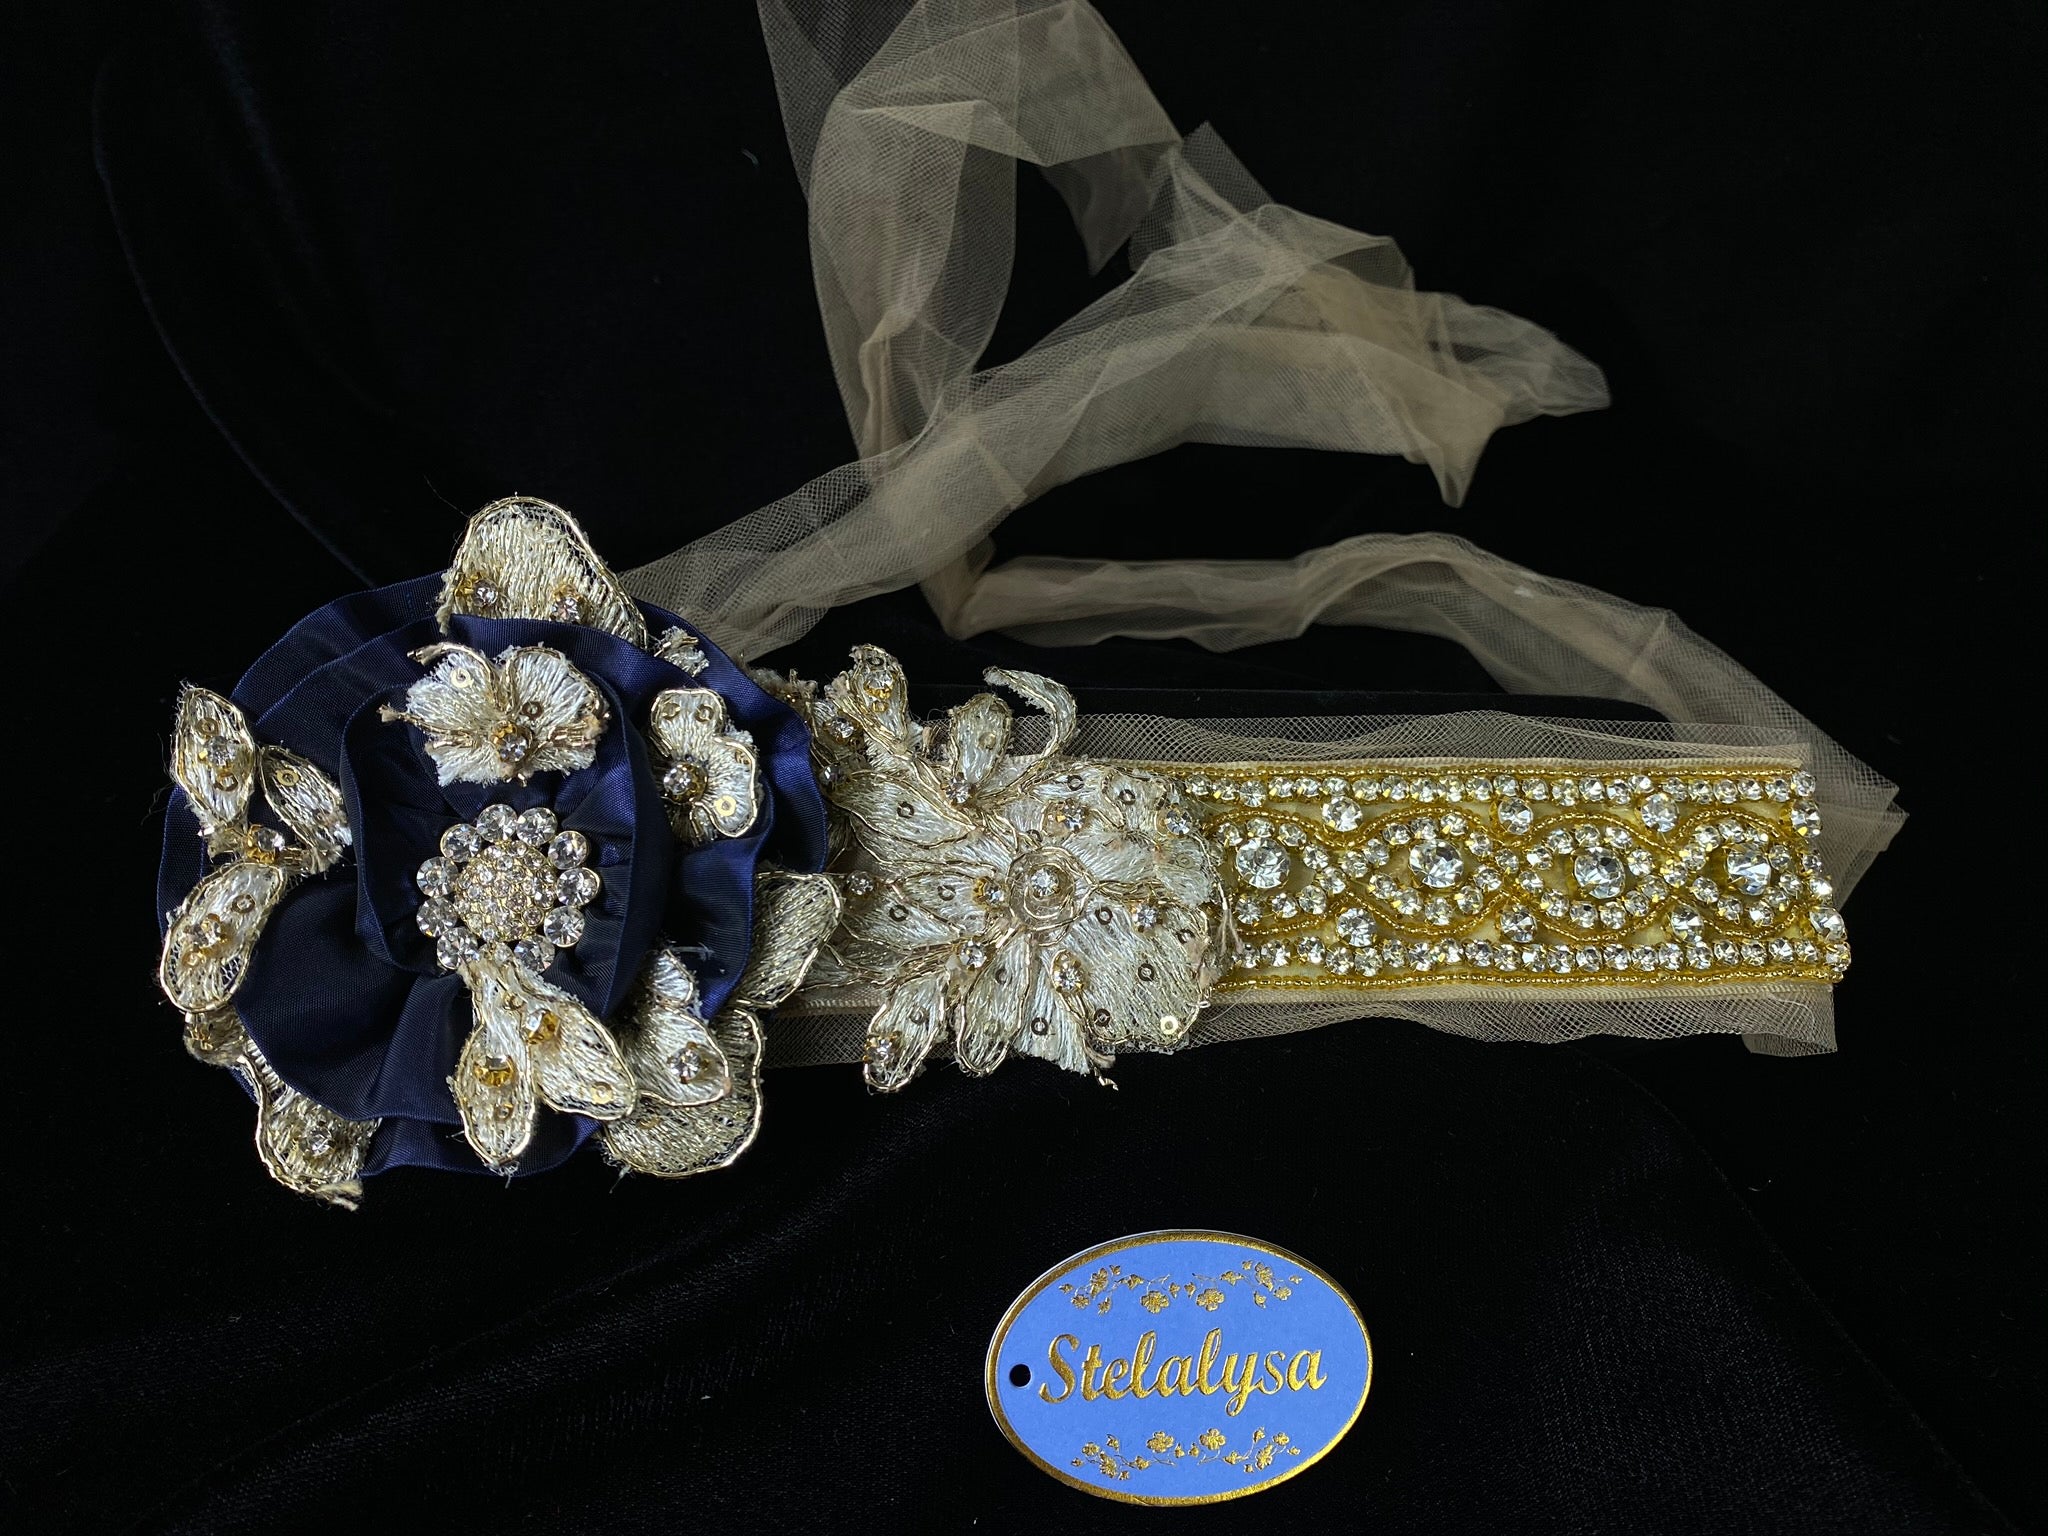 Headband with Strings - Royal Blue Flower and Champagne Tulle Strings  This is an elegant unique handmade and one-of-a-kind headband with a large Royal Blue flower and Champaign and Gold headband and long tulle strings attached.  The large flower is uniquely decorated with rhinestones, beads, and hand stitched flowers. The soft headband is made with elegant flowers with sequins, gold sequins, and rhinestones.  